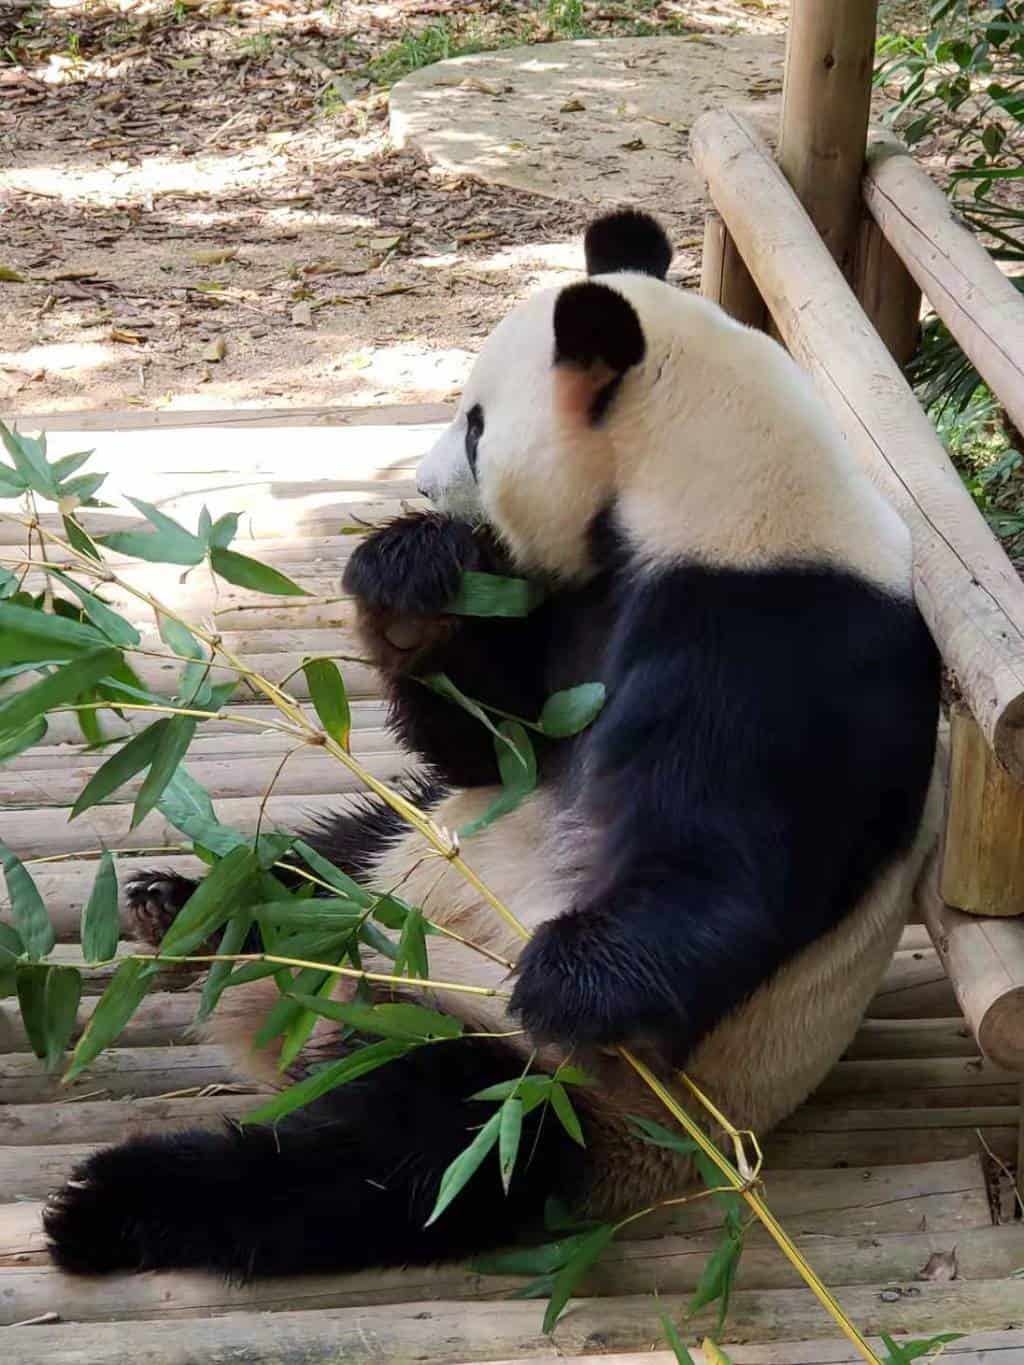 Featured image for “Shenzhen Zoo”